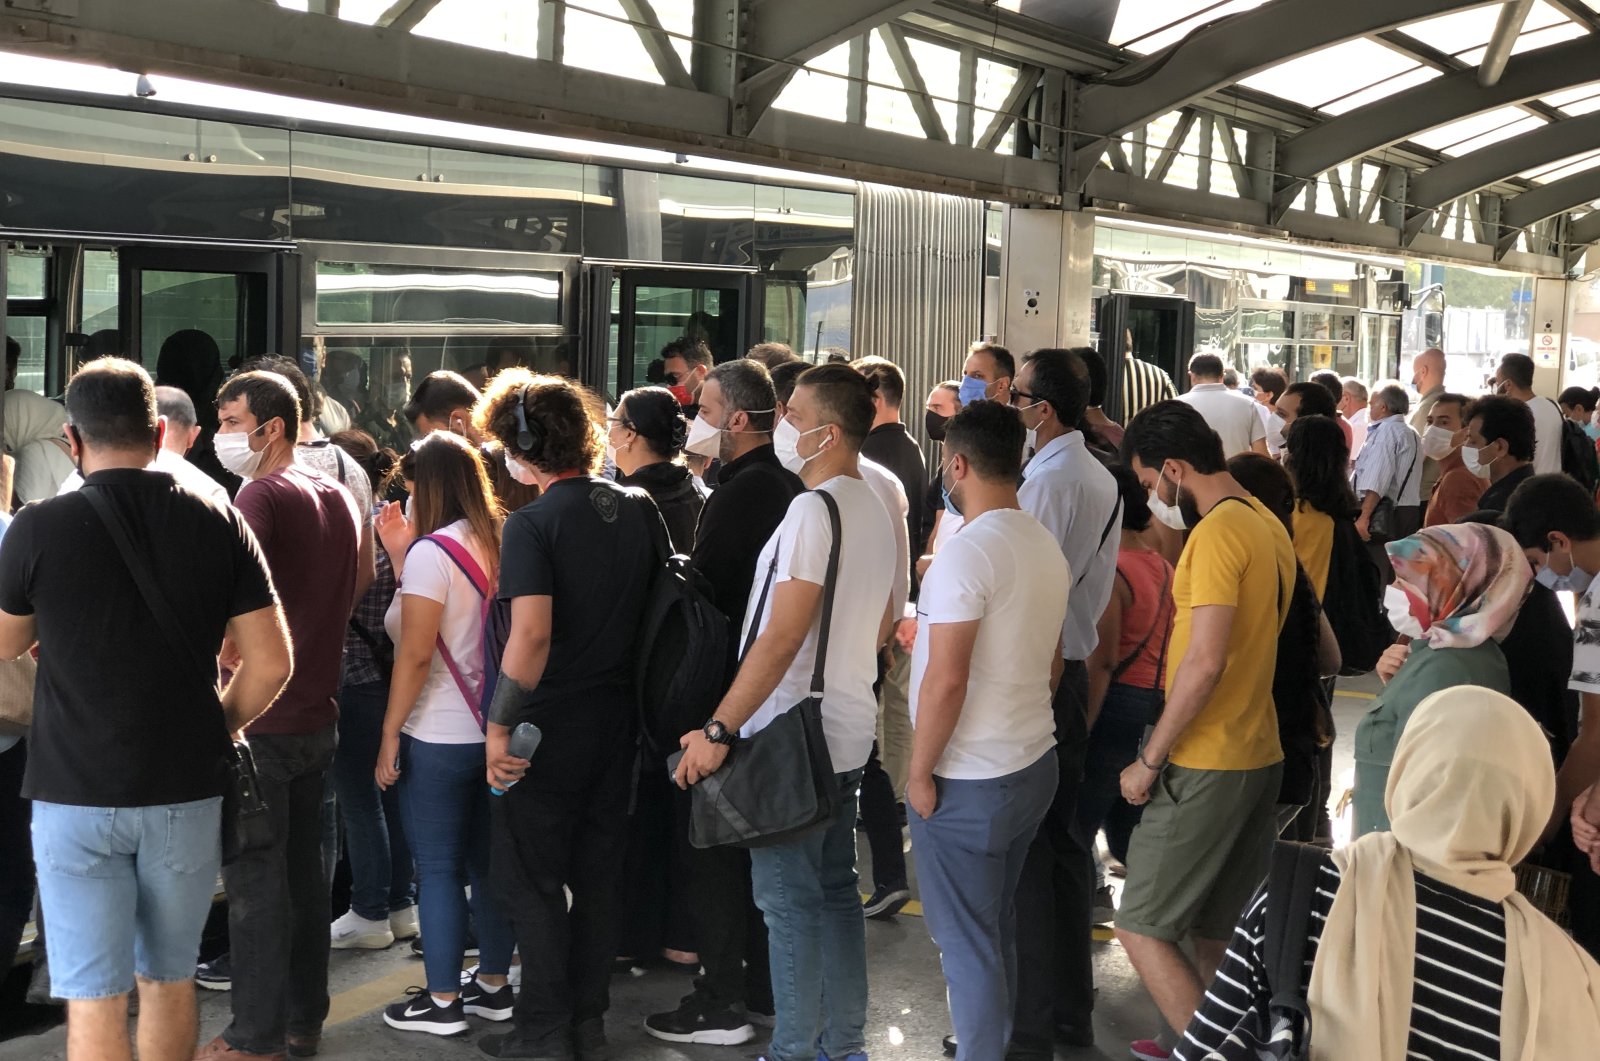 People form a queue as they wait to get on a metrobus in Istanbul, Turkey, Sept. 16, 2020. (IHA Photo)